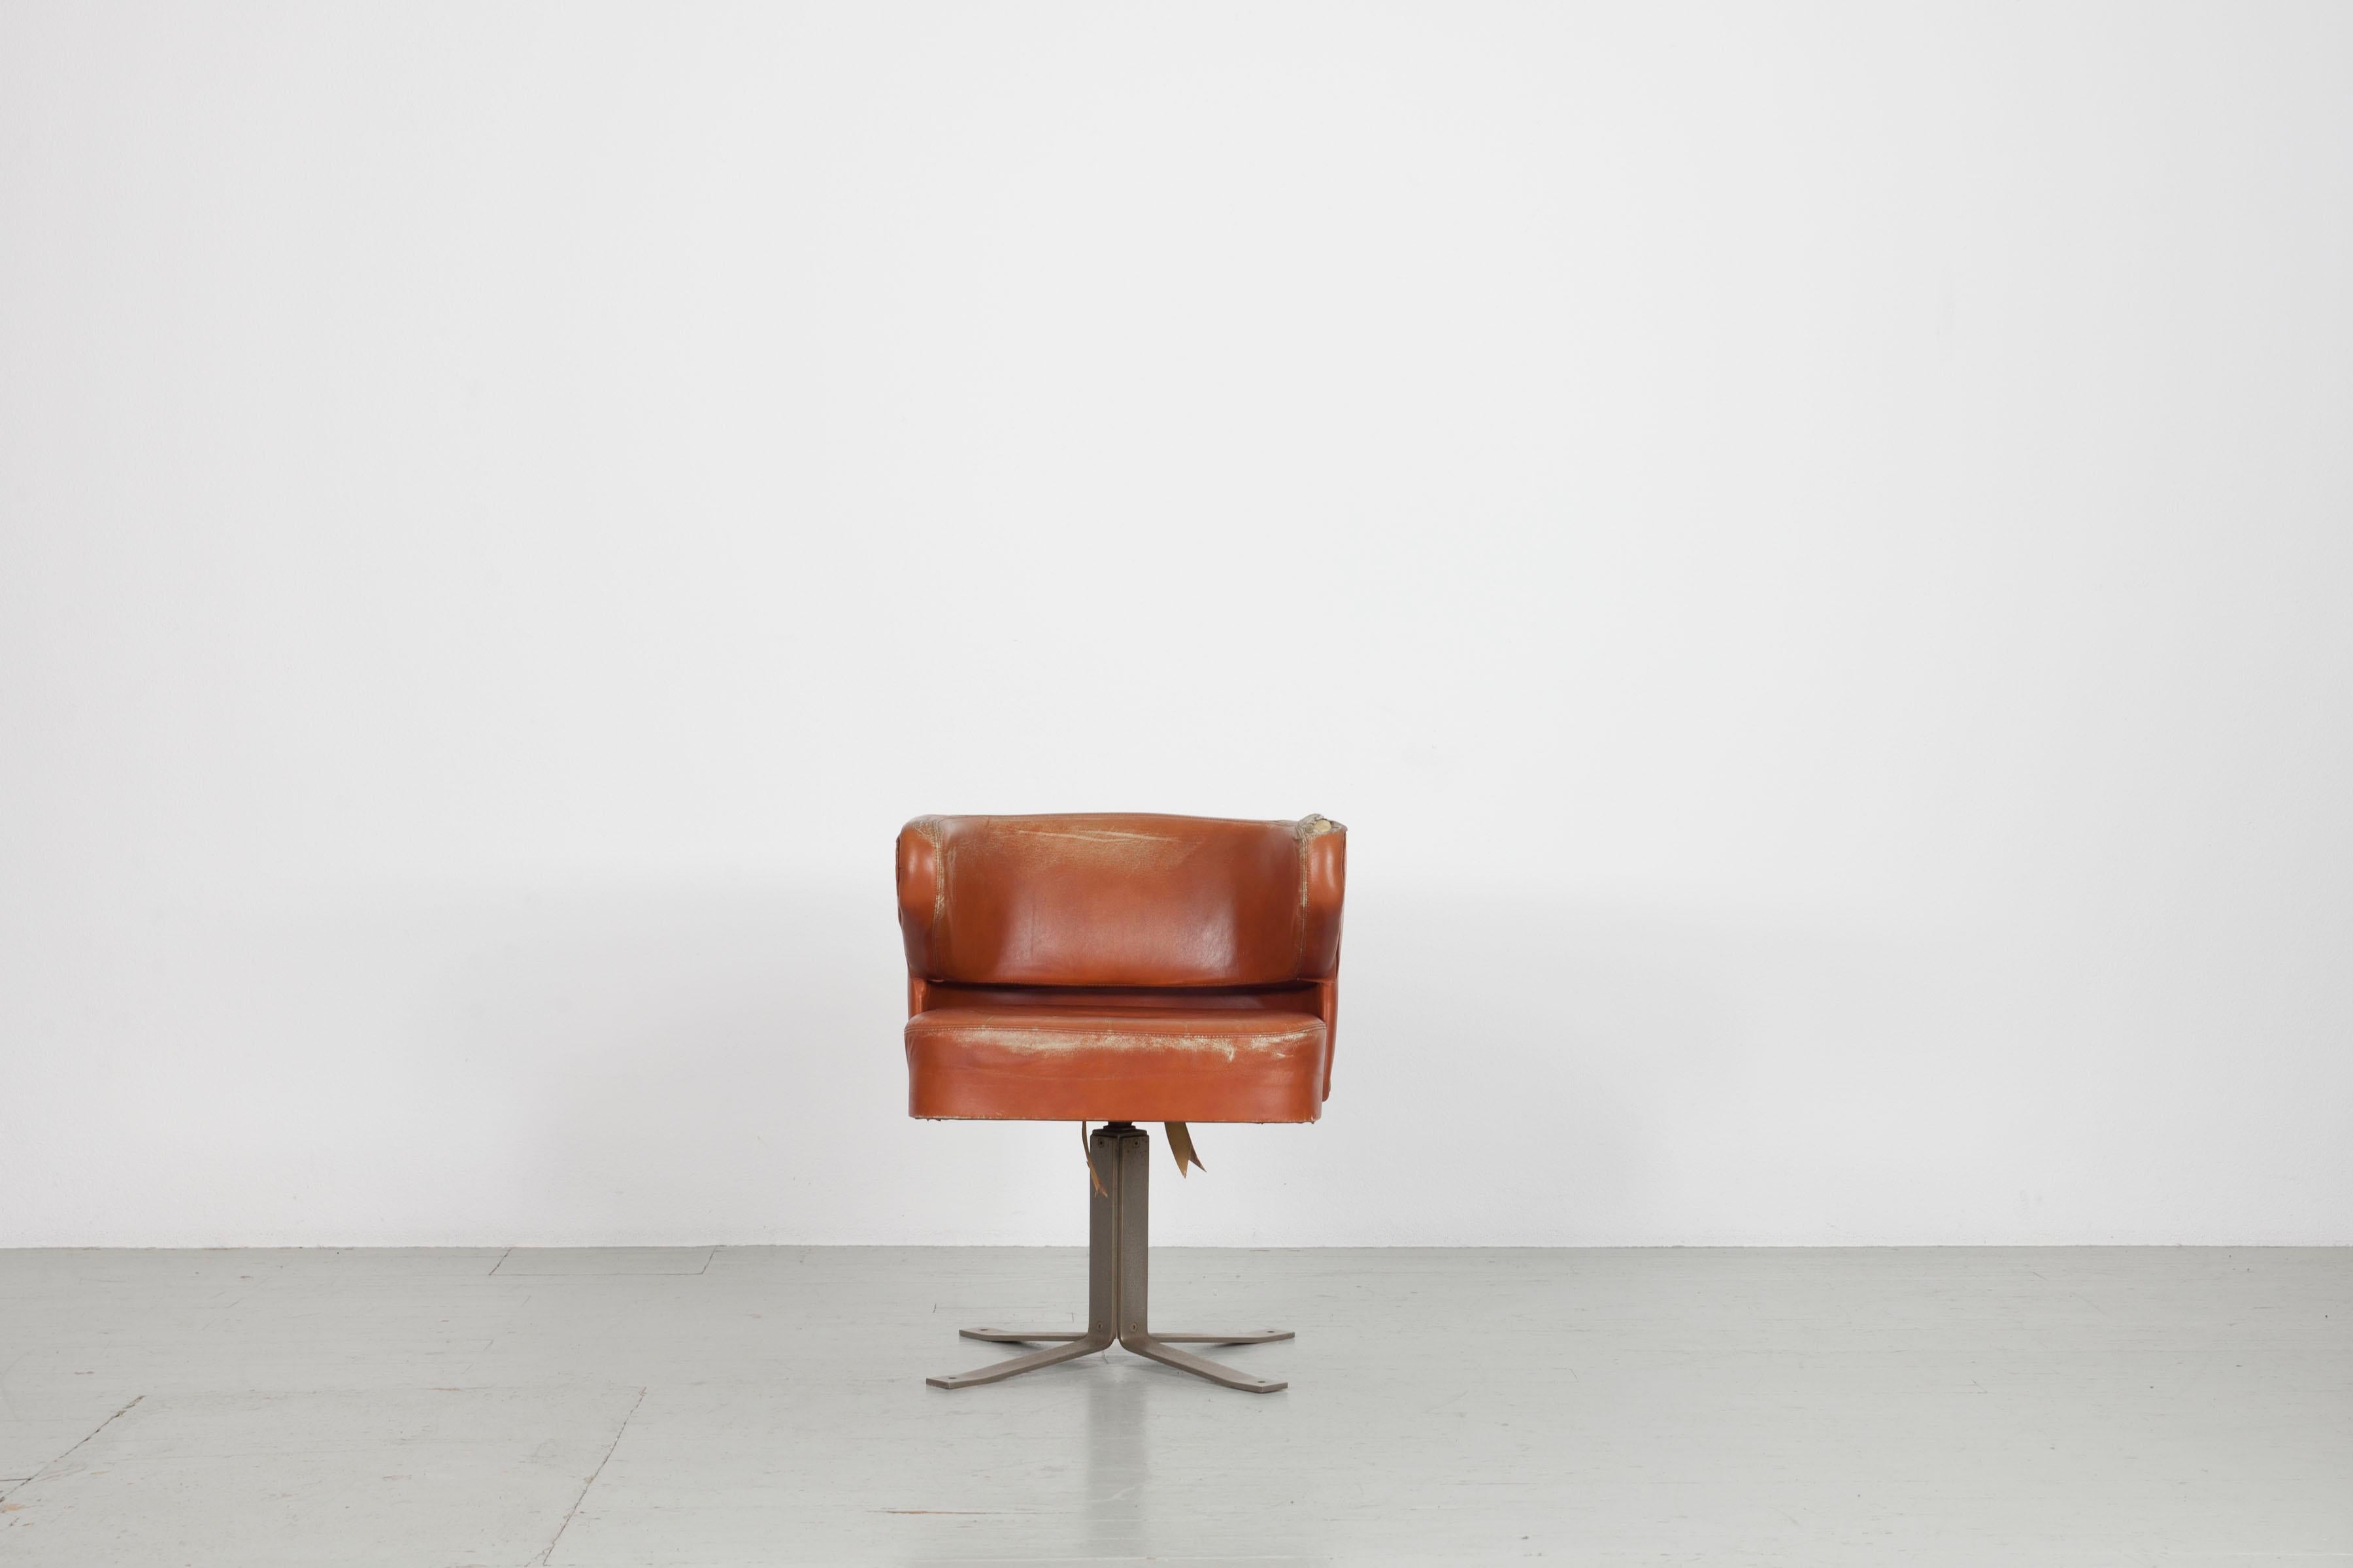 Swivel chair with casters.
Foam upholstery and Leather, chrome-plated metal frame.
Design: Gianni Moscatelli.
Model: Poney.
Manufacturer: Formanova, Italy 1960s

The chair needs a new cover.
 